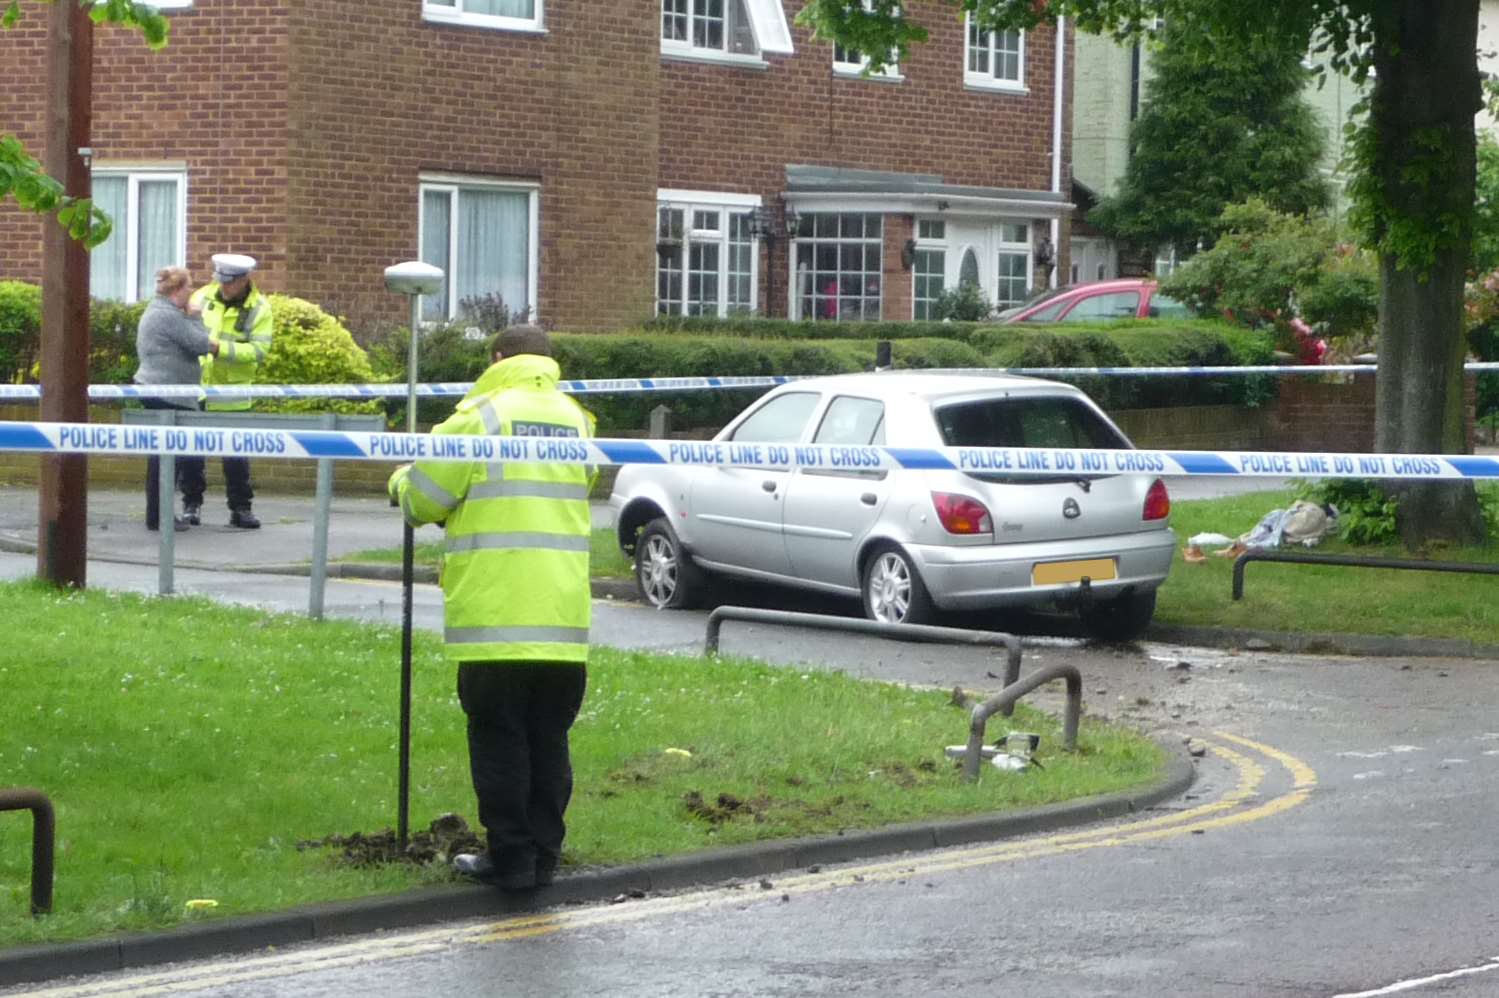 Police investigators in Twydall where a man died after crashing his car